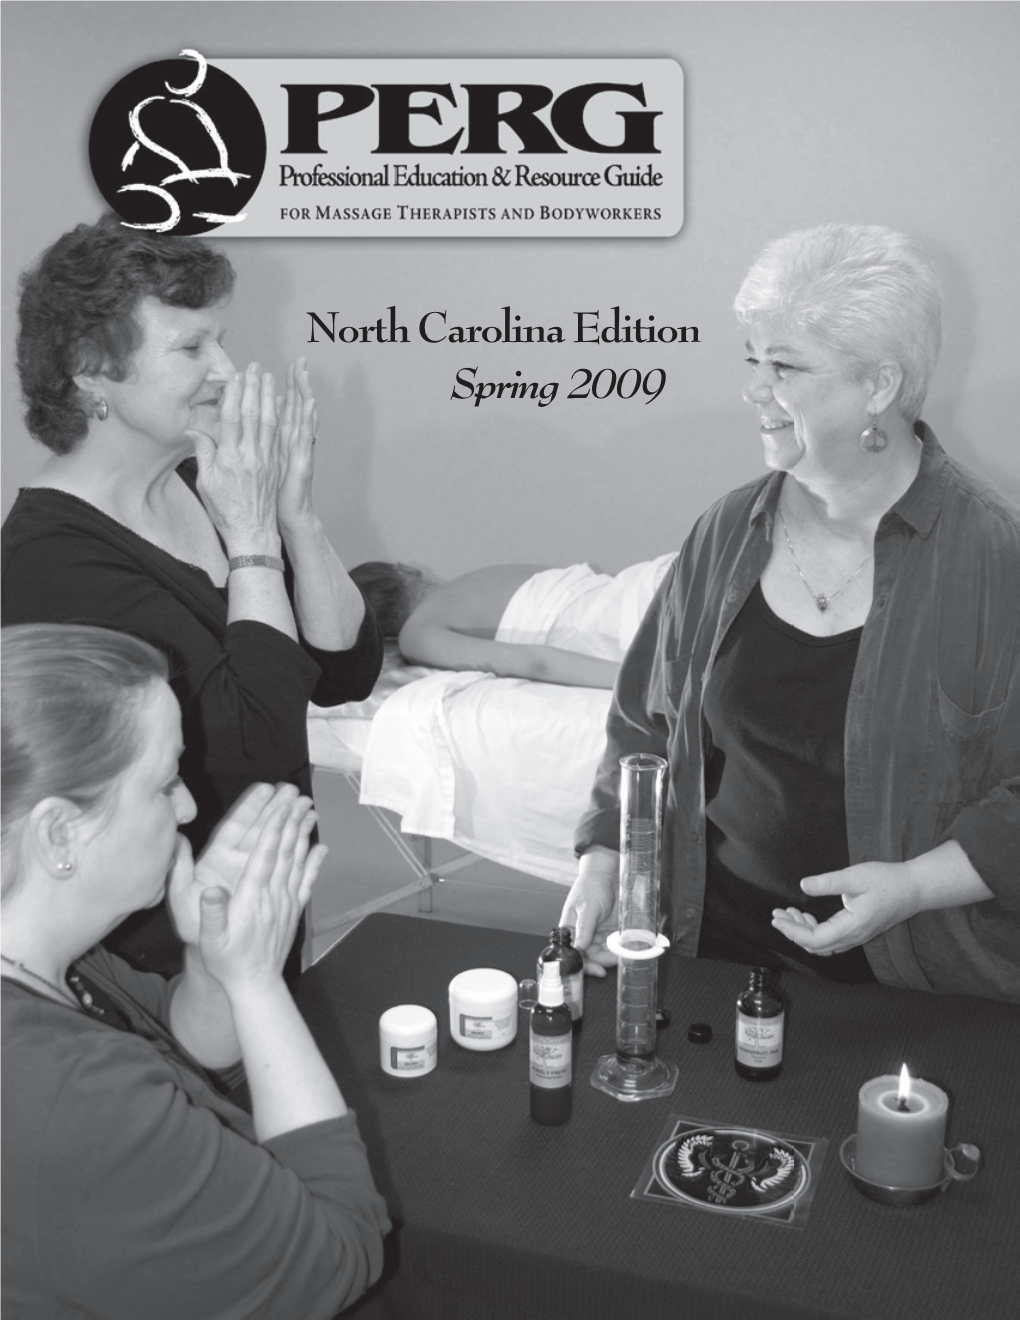 North Carolina Edition Spring 2009 Cover Photo by David Kilian, Taken at Miller Motte College in Cary, NC